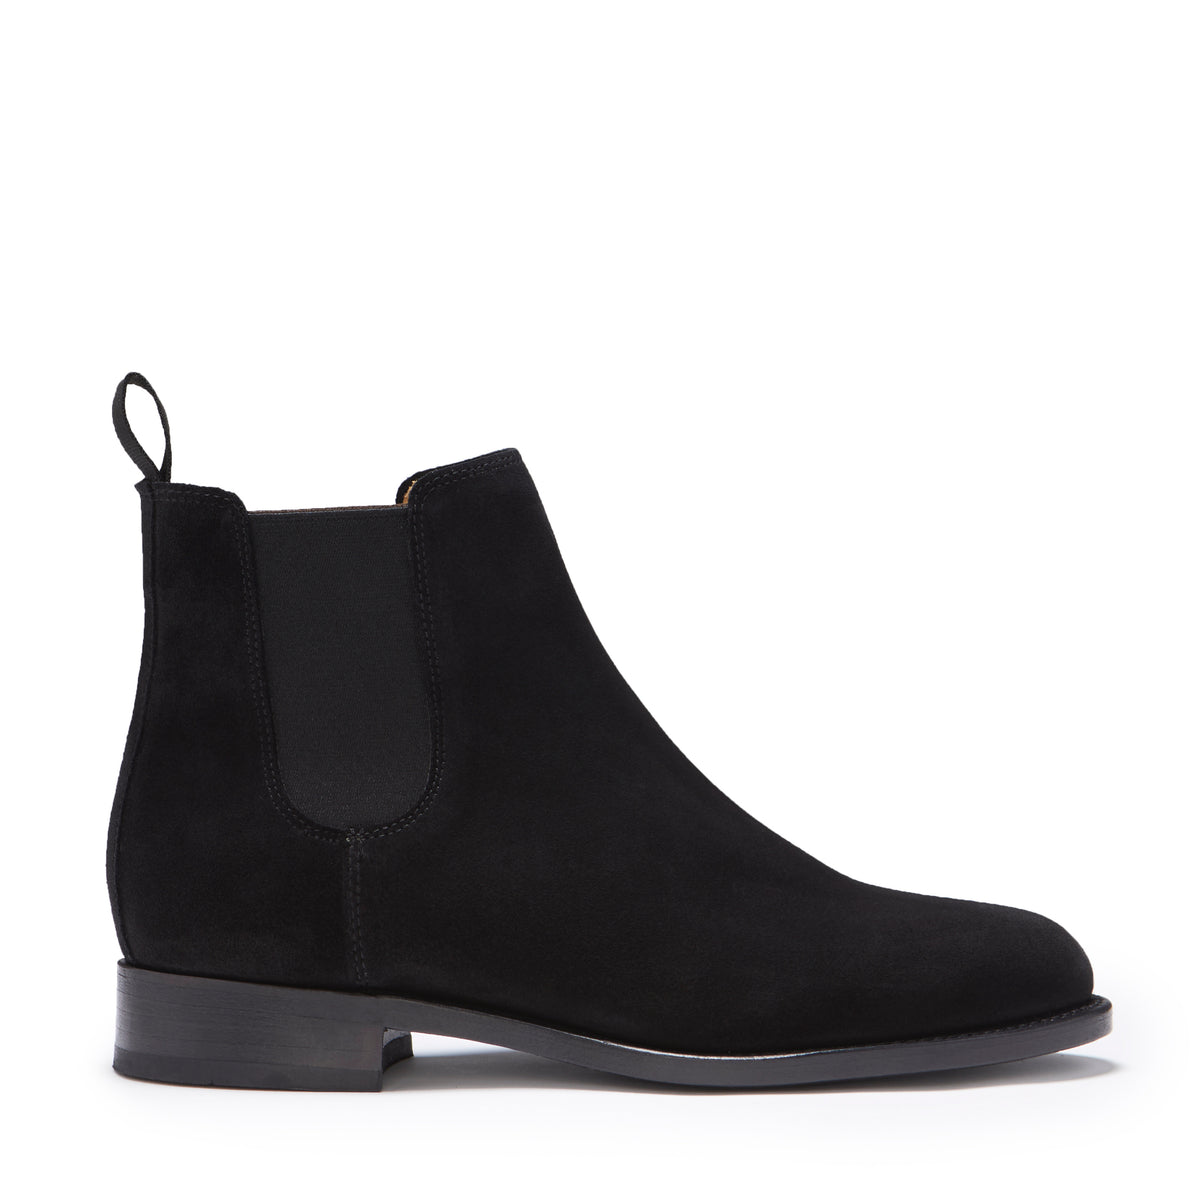 Women's Black Suede Chelsea Boots, Welted Leather Sole - Hugs & Co.